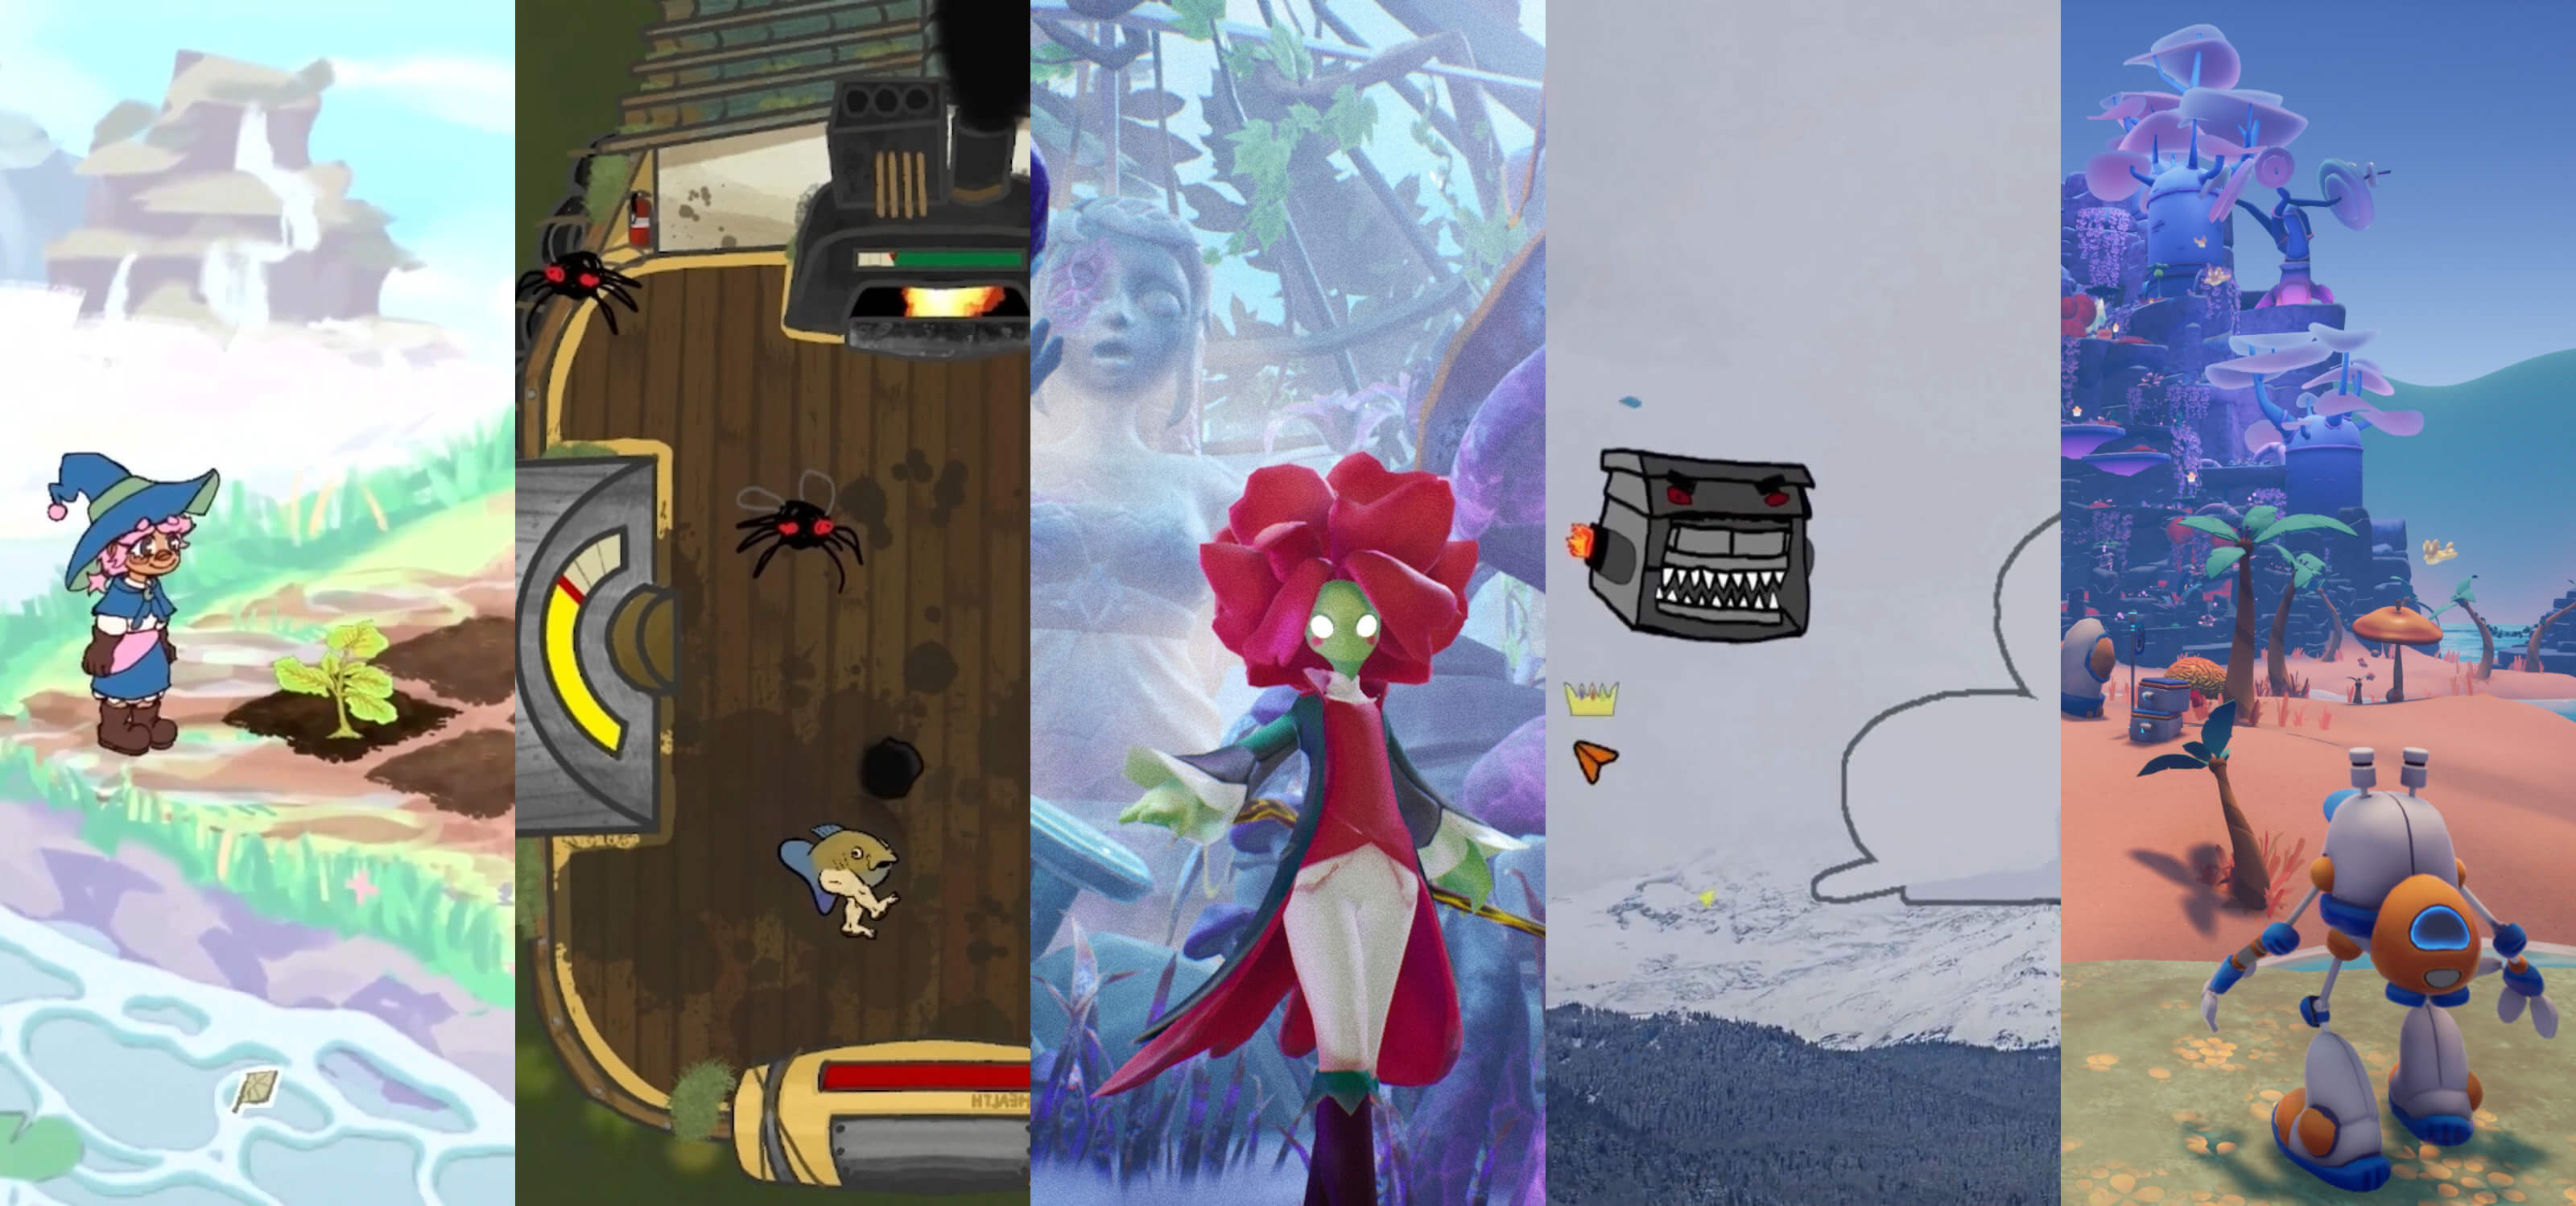 Collage of student game screenshots featuring a robot, walking fish, gardening witch, and more.